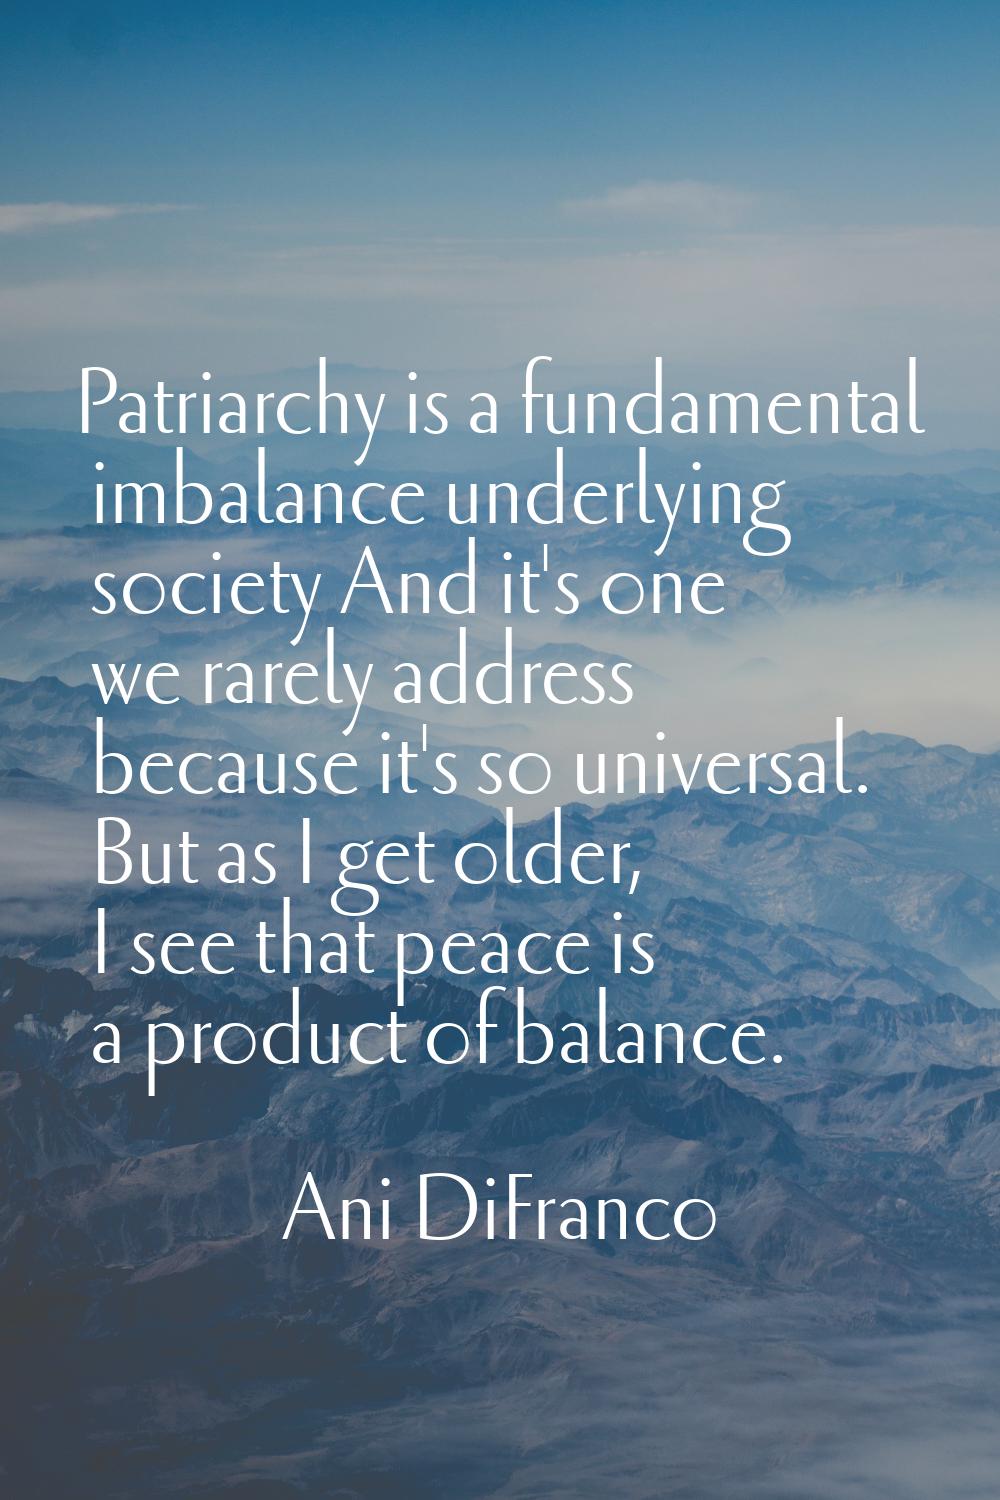 Patriarchy is a fundamental imbalance underlying society And it's one we rarely address because it'